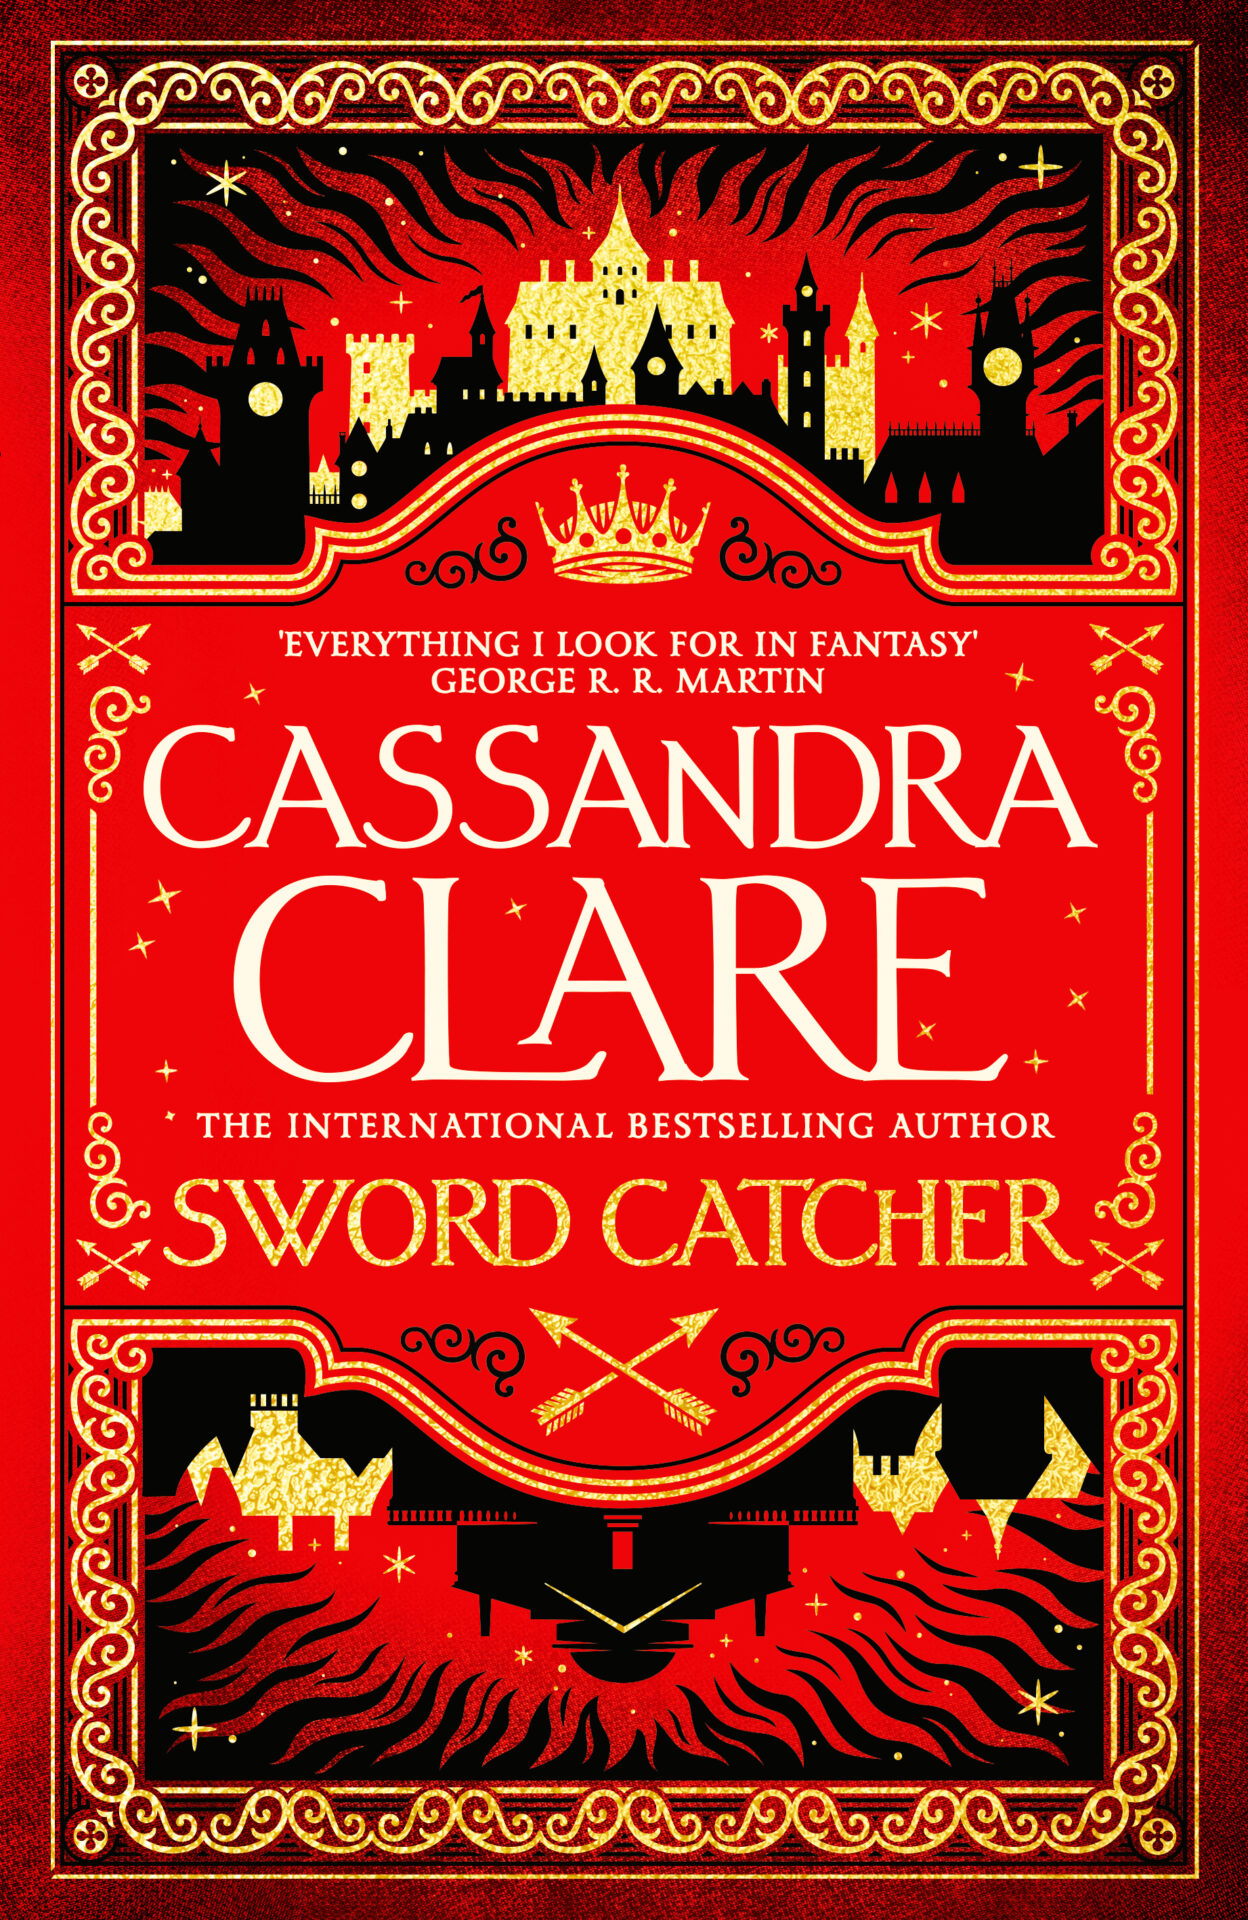 Cassandra Clare sued for copyright infringement over Shadowhunter series